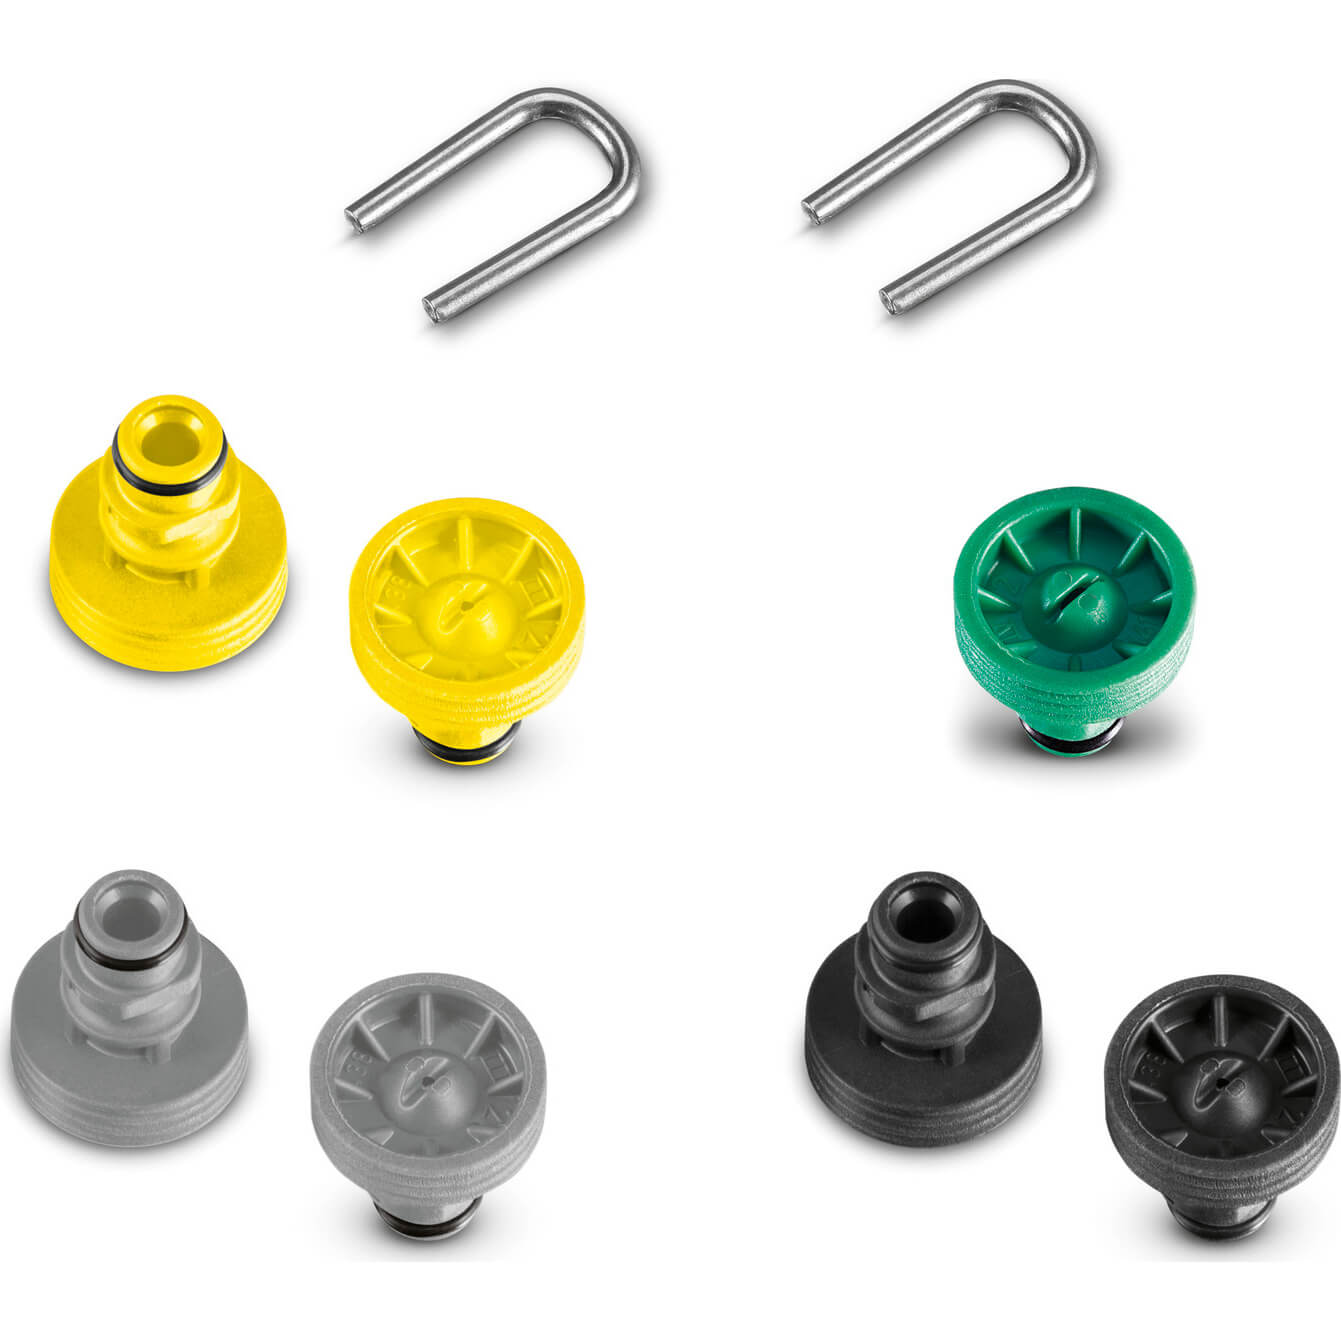 Karcher Replacement Nozzle Set for T450 and T550 Patio Cleaners